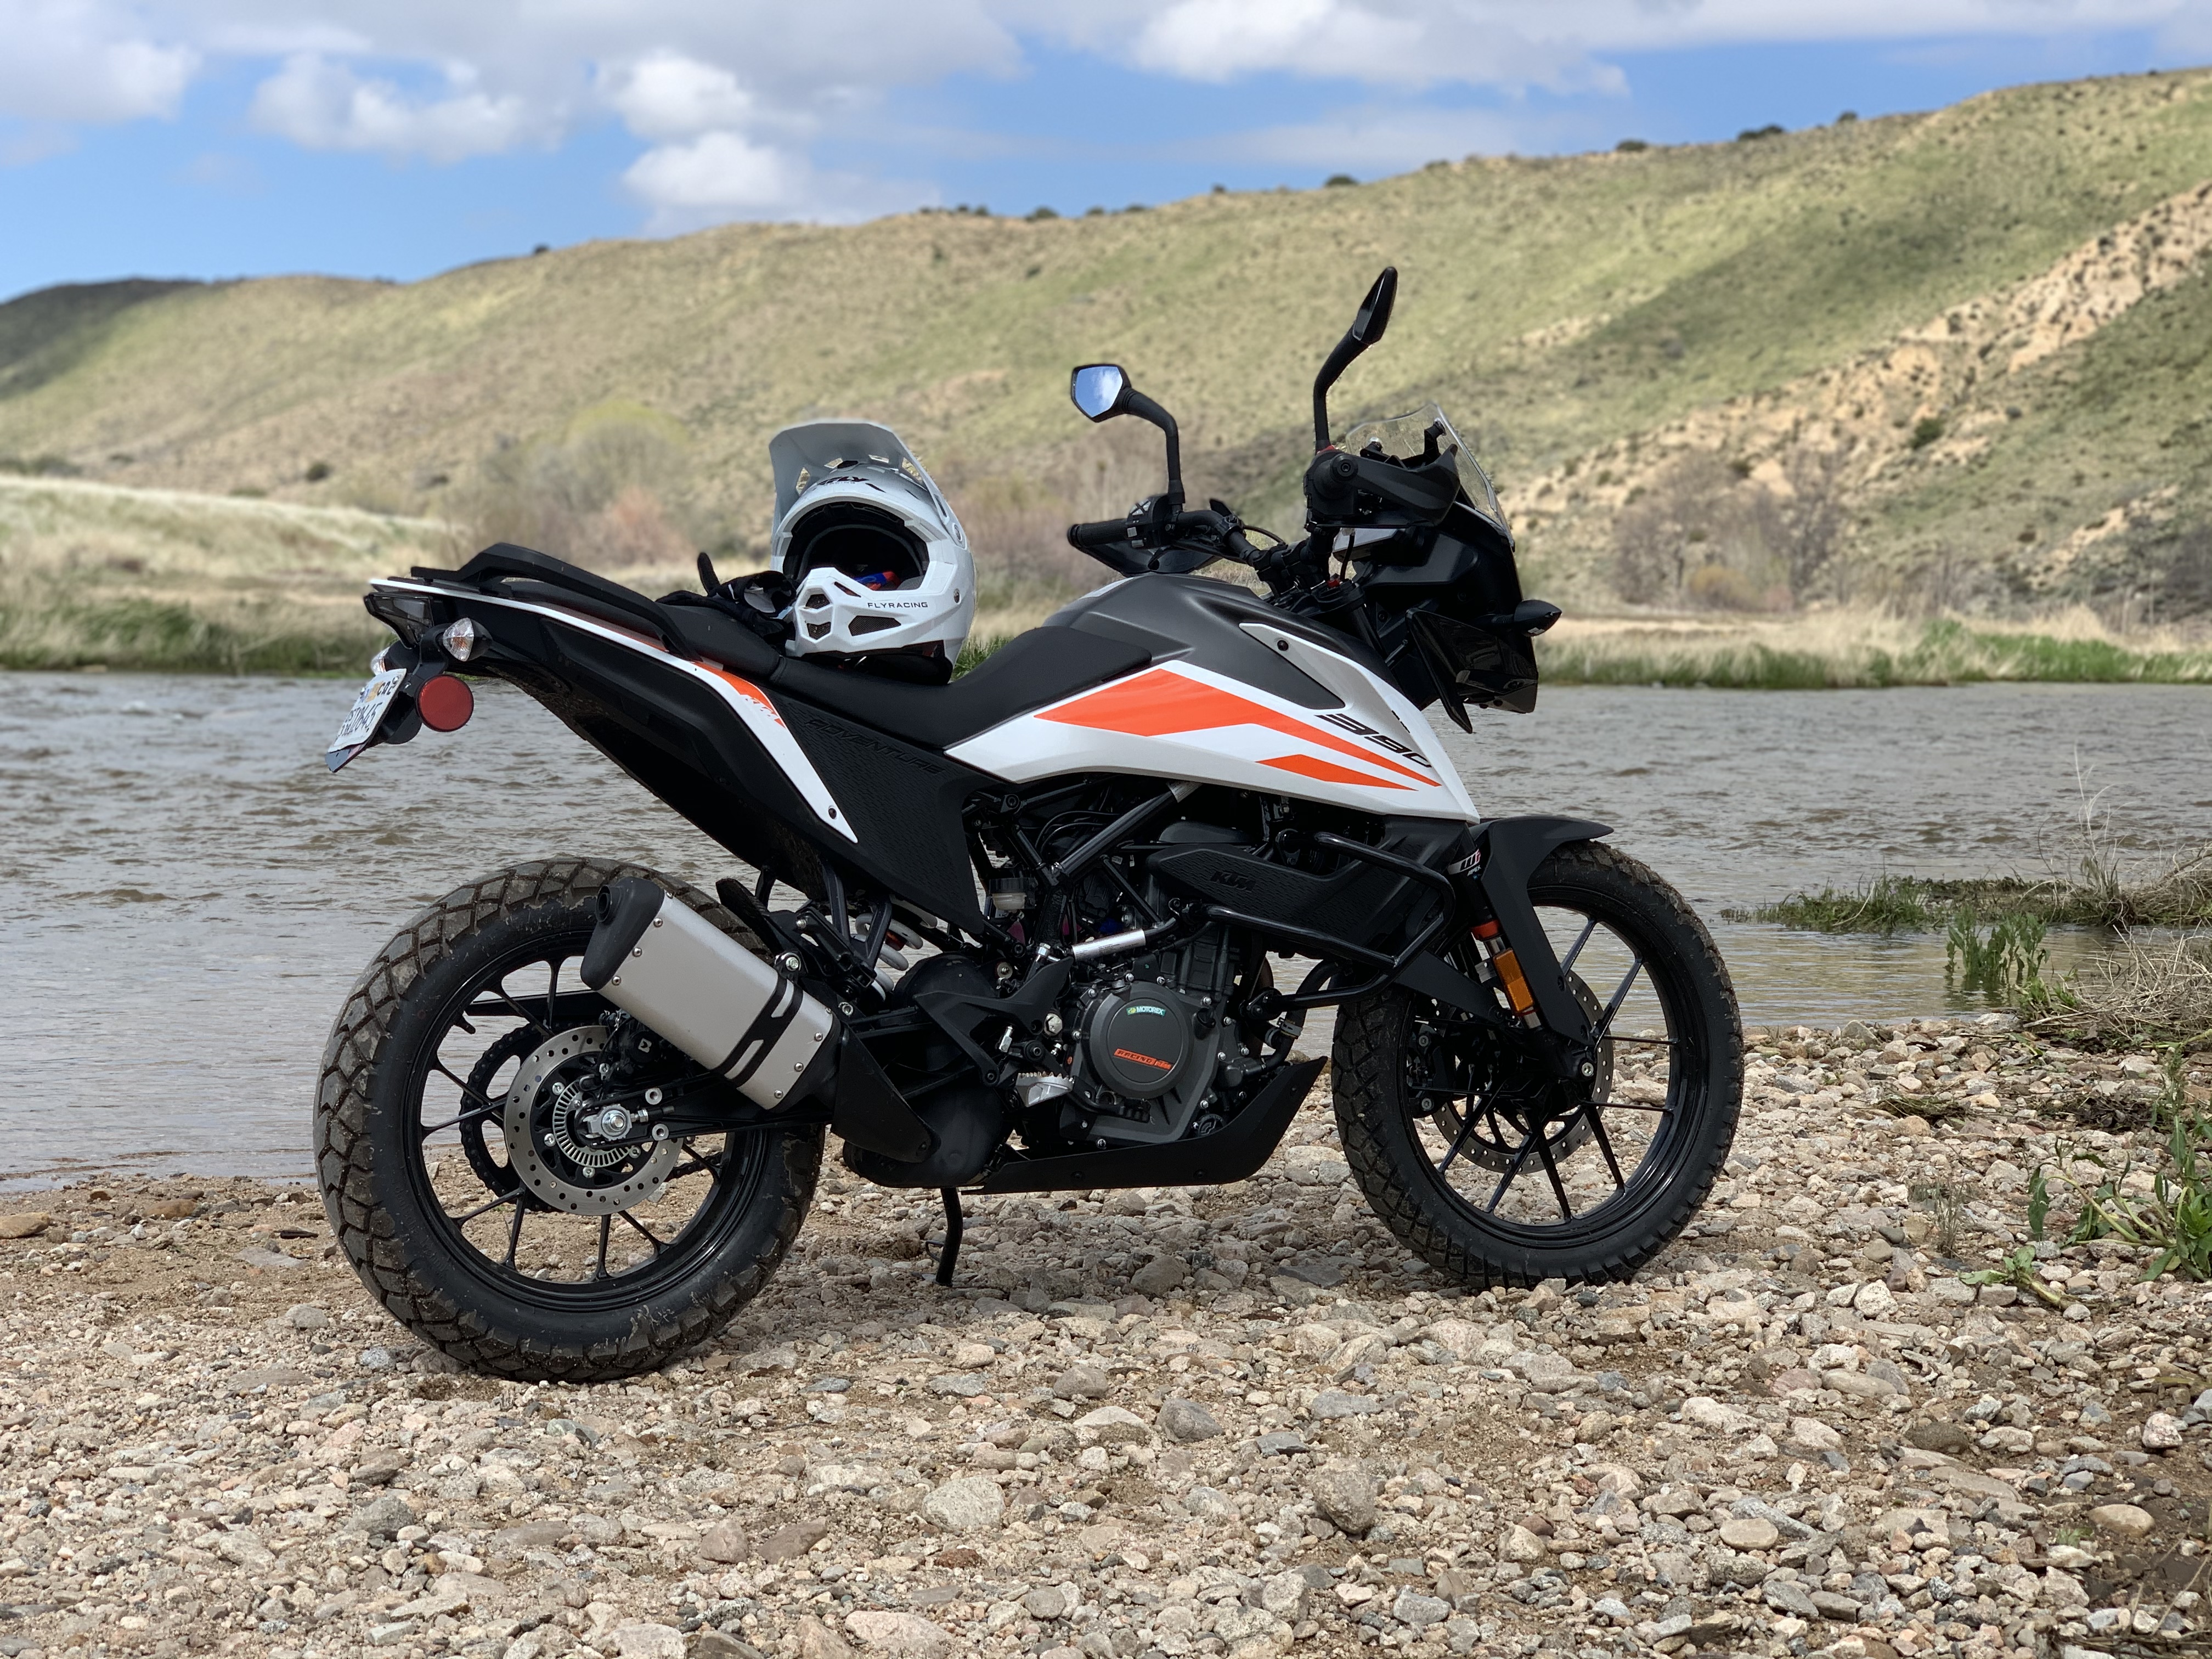 KTM 390 Adventure NZ specification road test review